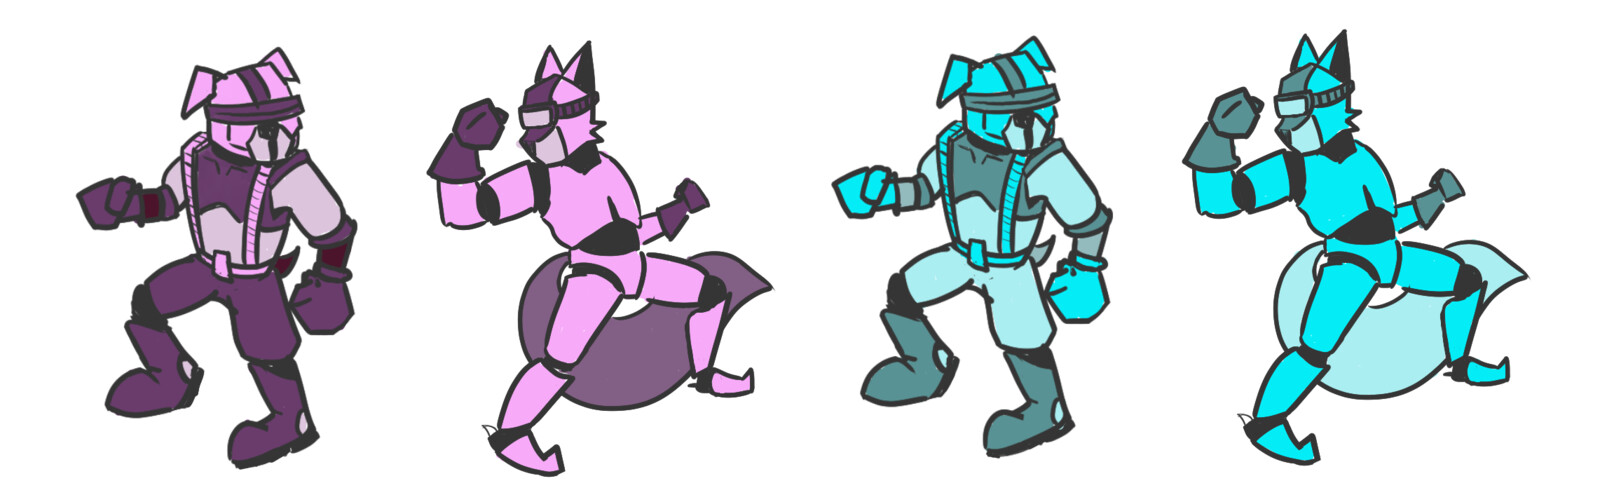 Decided as a group that it would be Cats vs Dogs game. I wanted to make sure the style of each team was different first. Dog faction was inspired by a more military Halo look while the cat faction was more Star Wars Storm Trooper kind of vibe